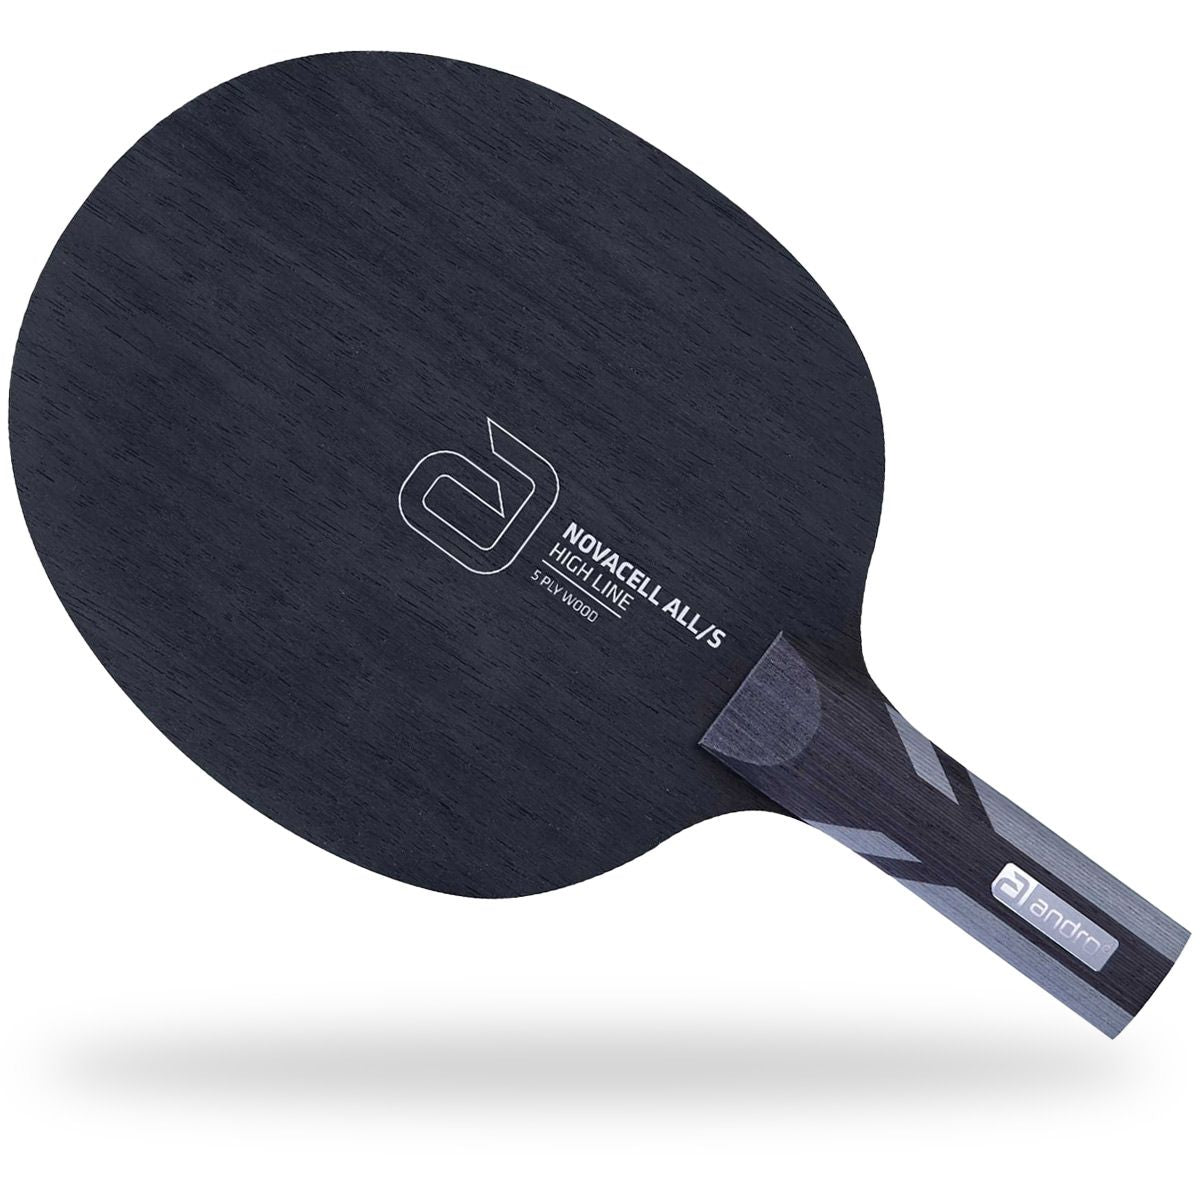 ANDRO Novacell ALL/S - Table Tennis Blade